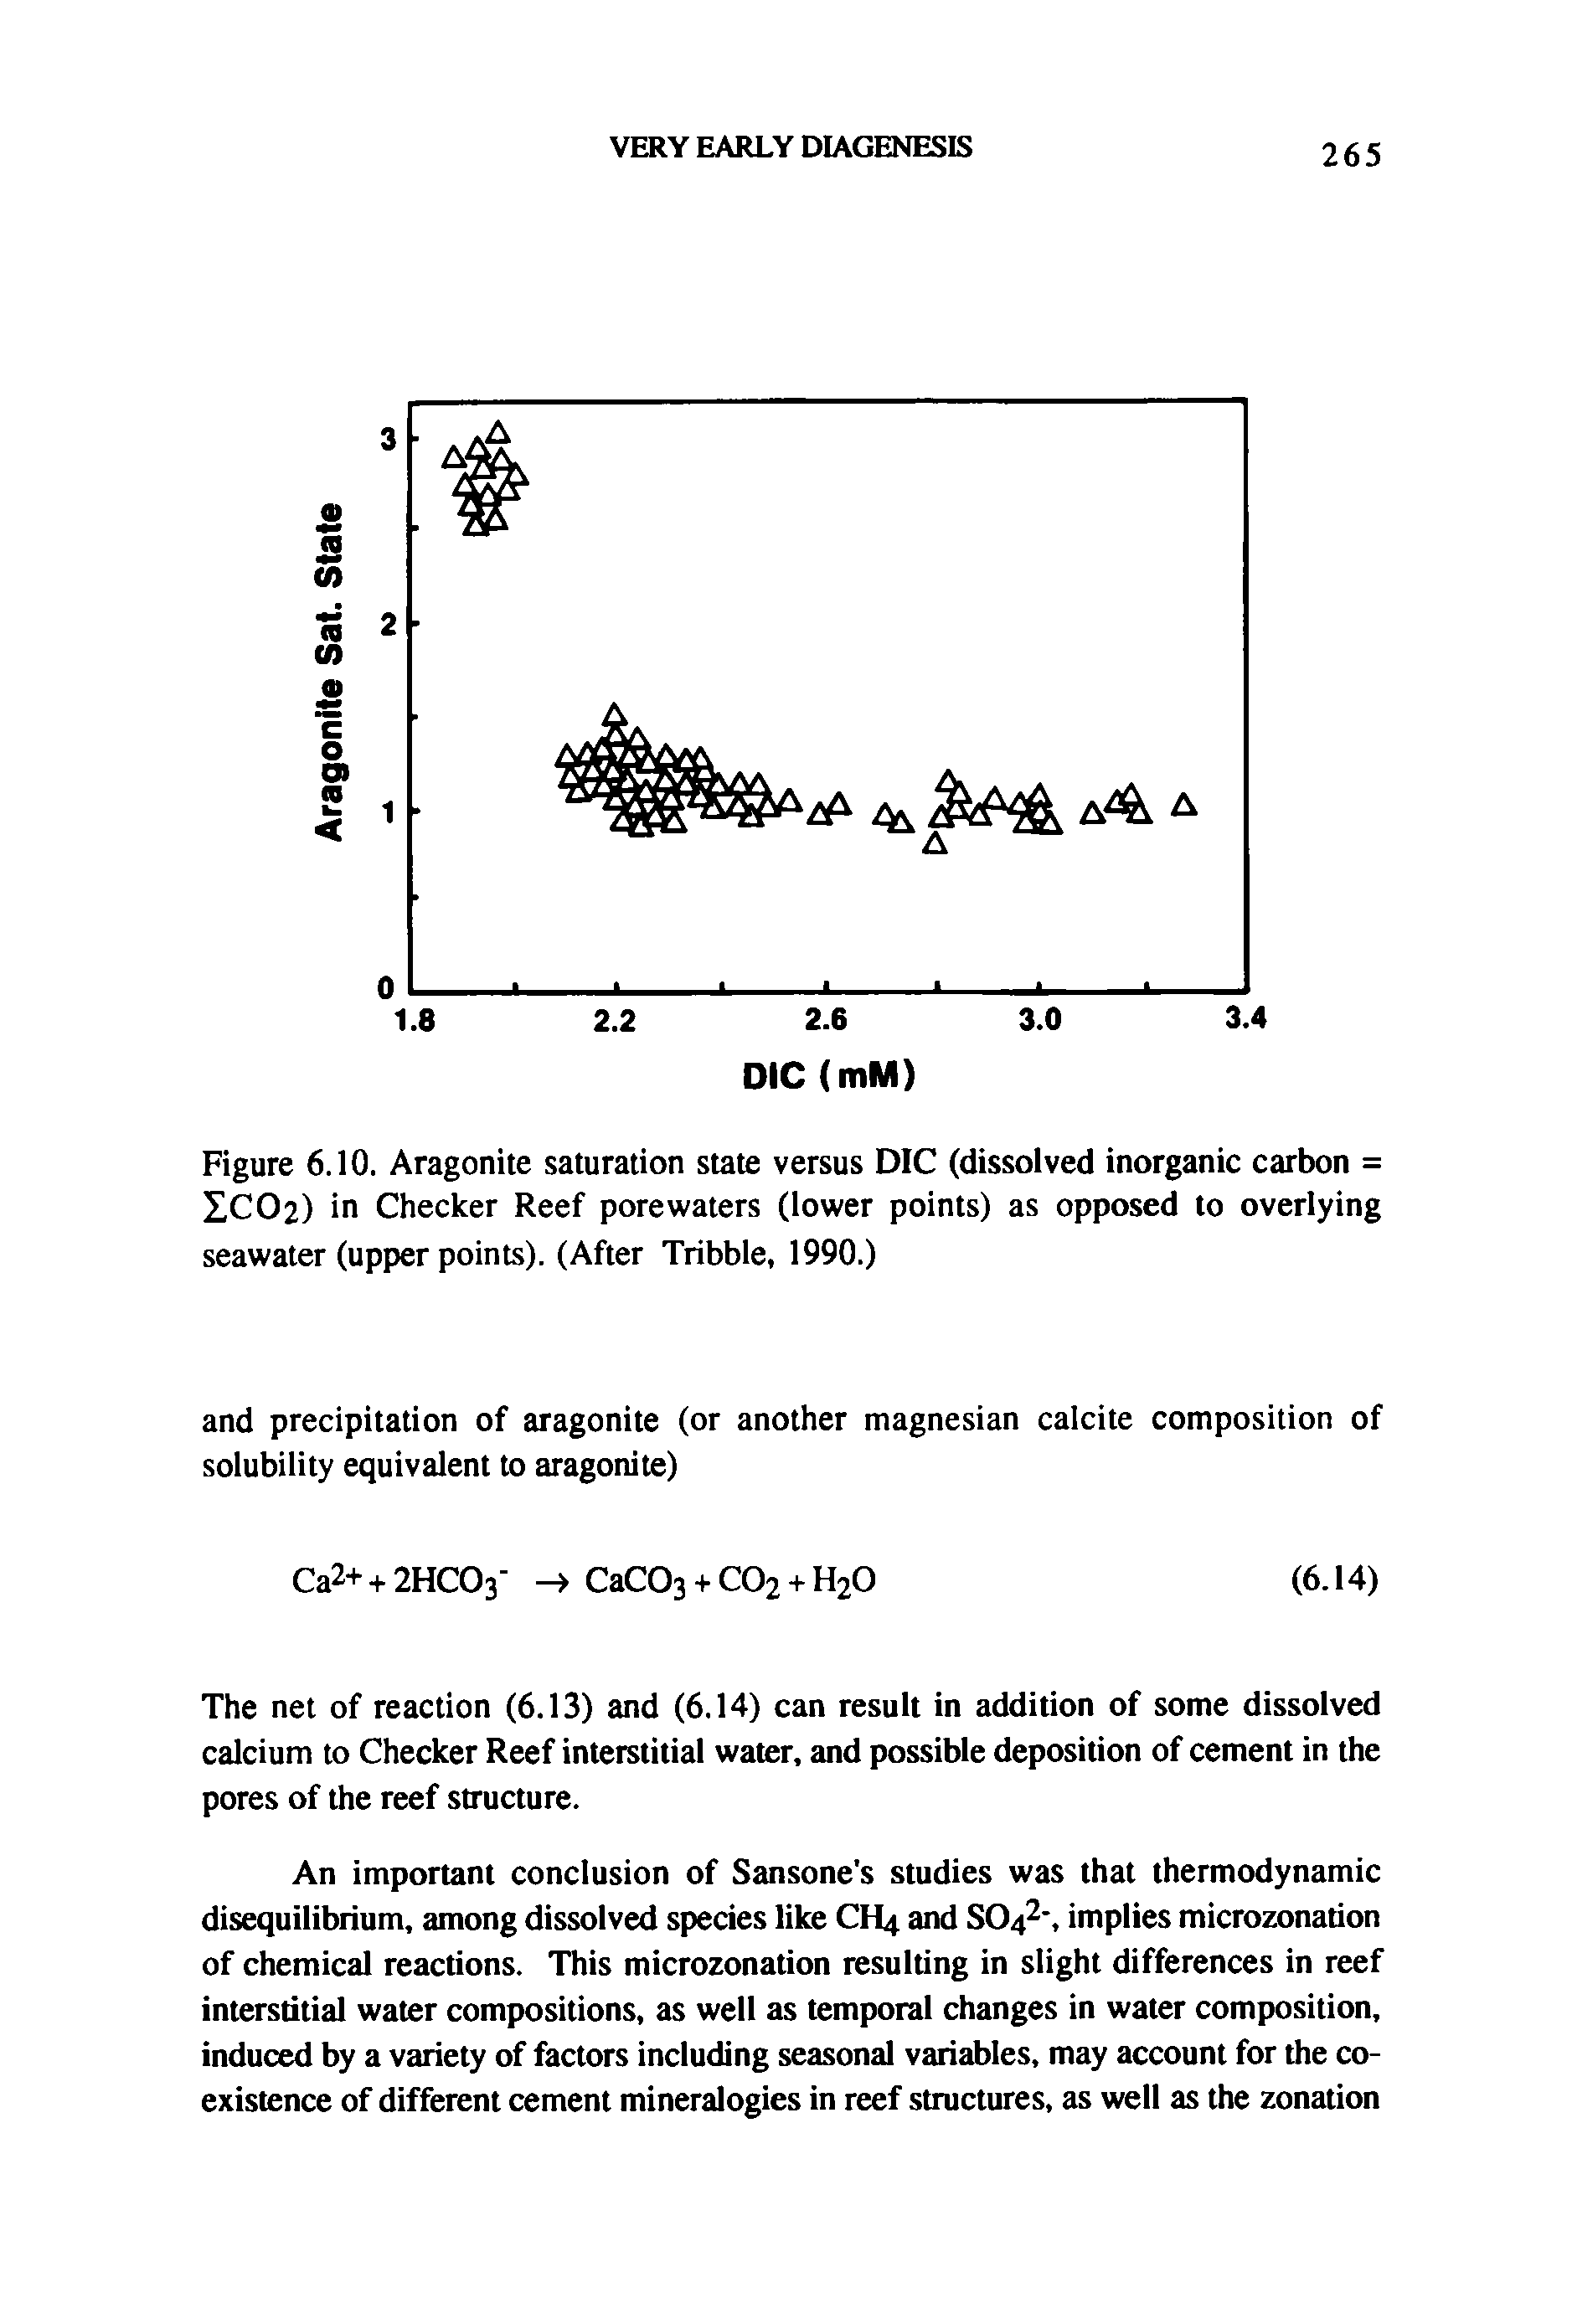 Figure 6.10. Aragonite saturation state versus DIC (dissolved inorganic carbon = SCO2) in Checker Reef porewaters (lower points) as opposed to overlying seawater (upper points). (After Tribble, 1990.)...